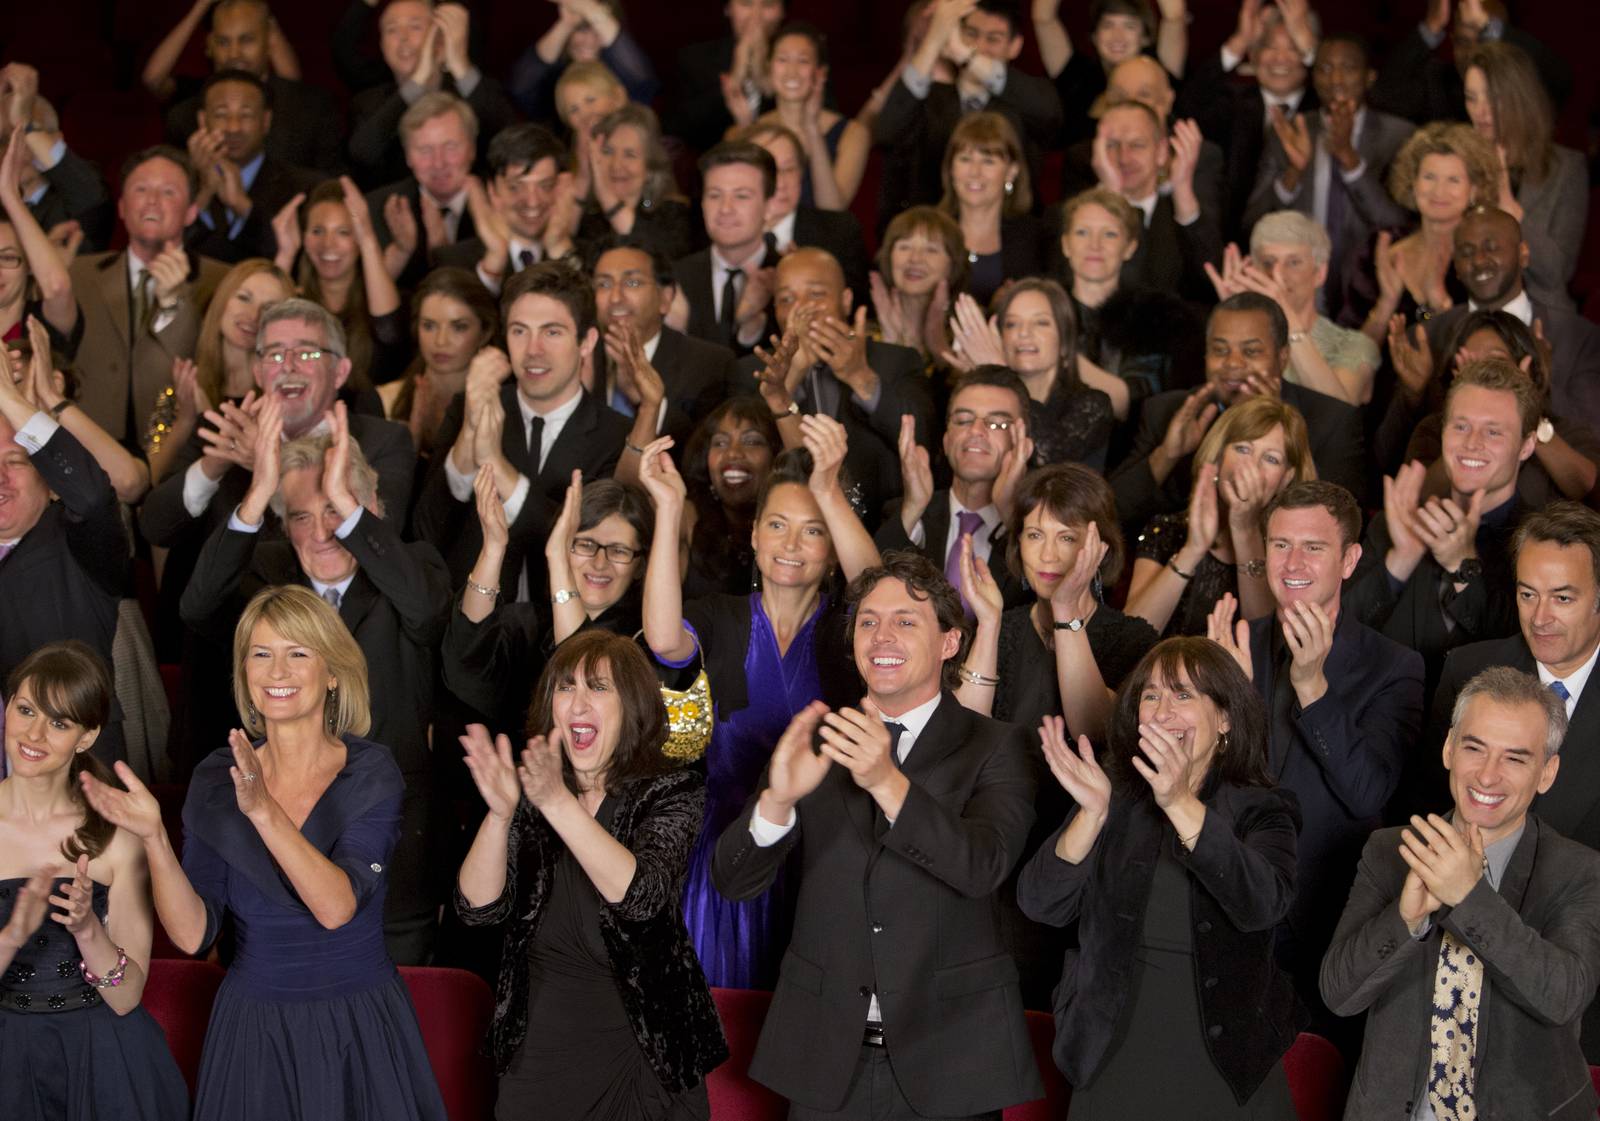 Clapping theater audience standing ovation